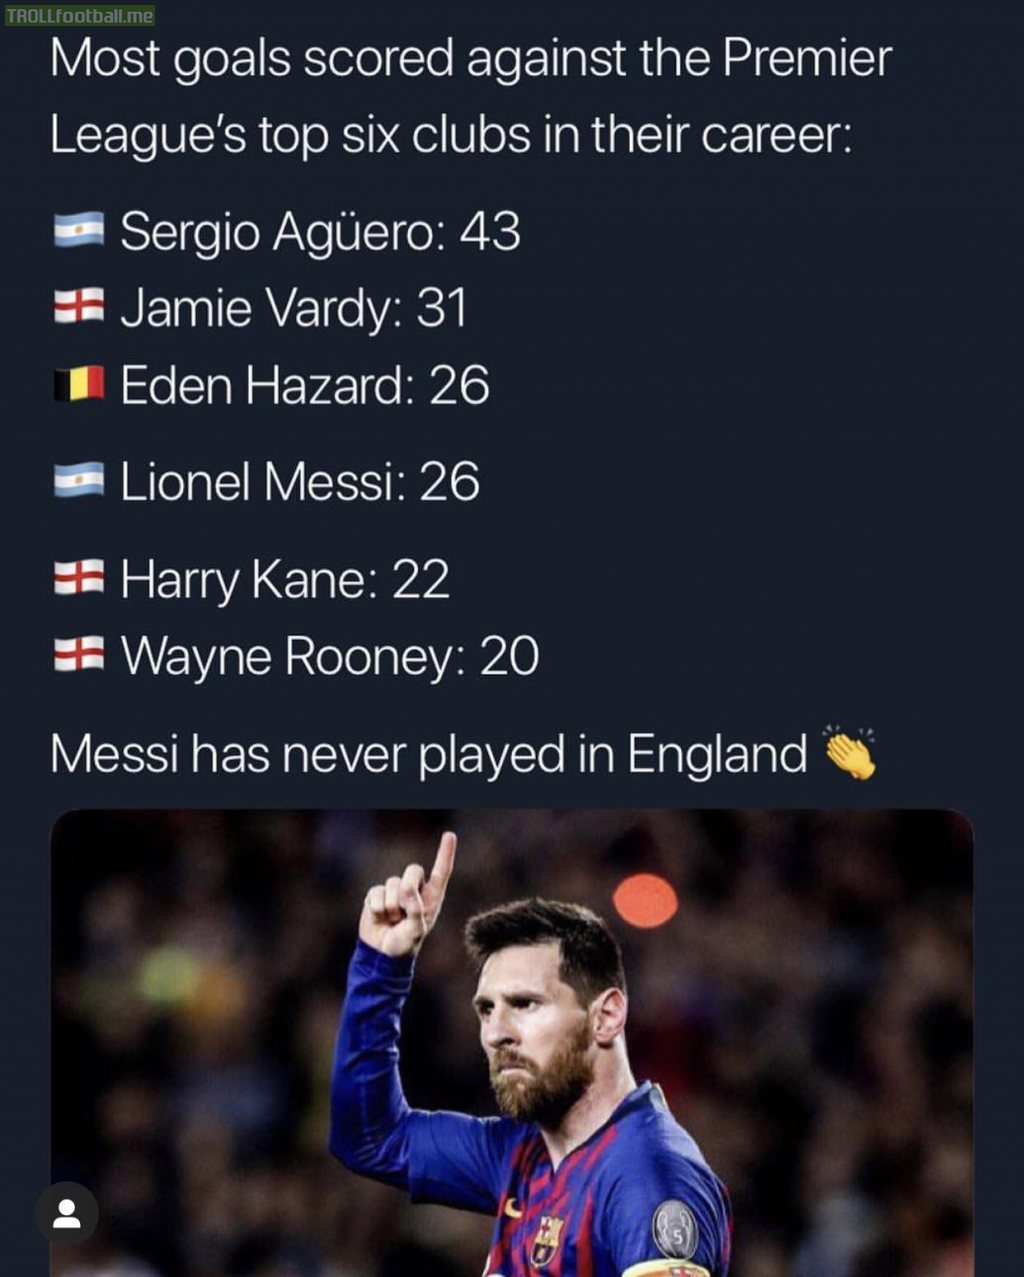 Messi Has Scored More Goals Against The Premier Leagues Top 6 Clubs Than Wayne Rooney Troll Football